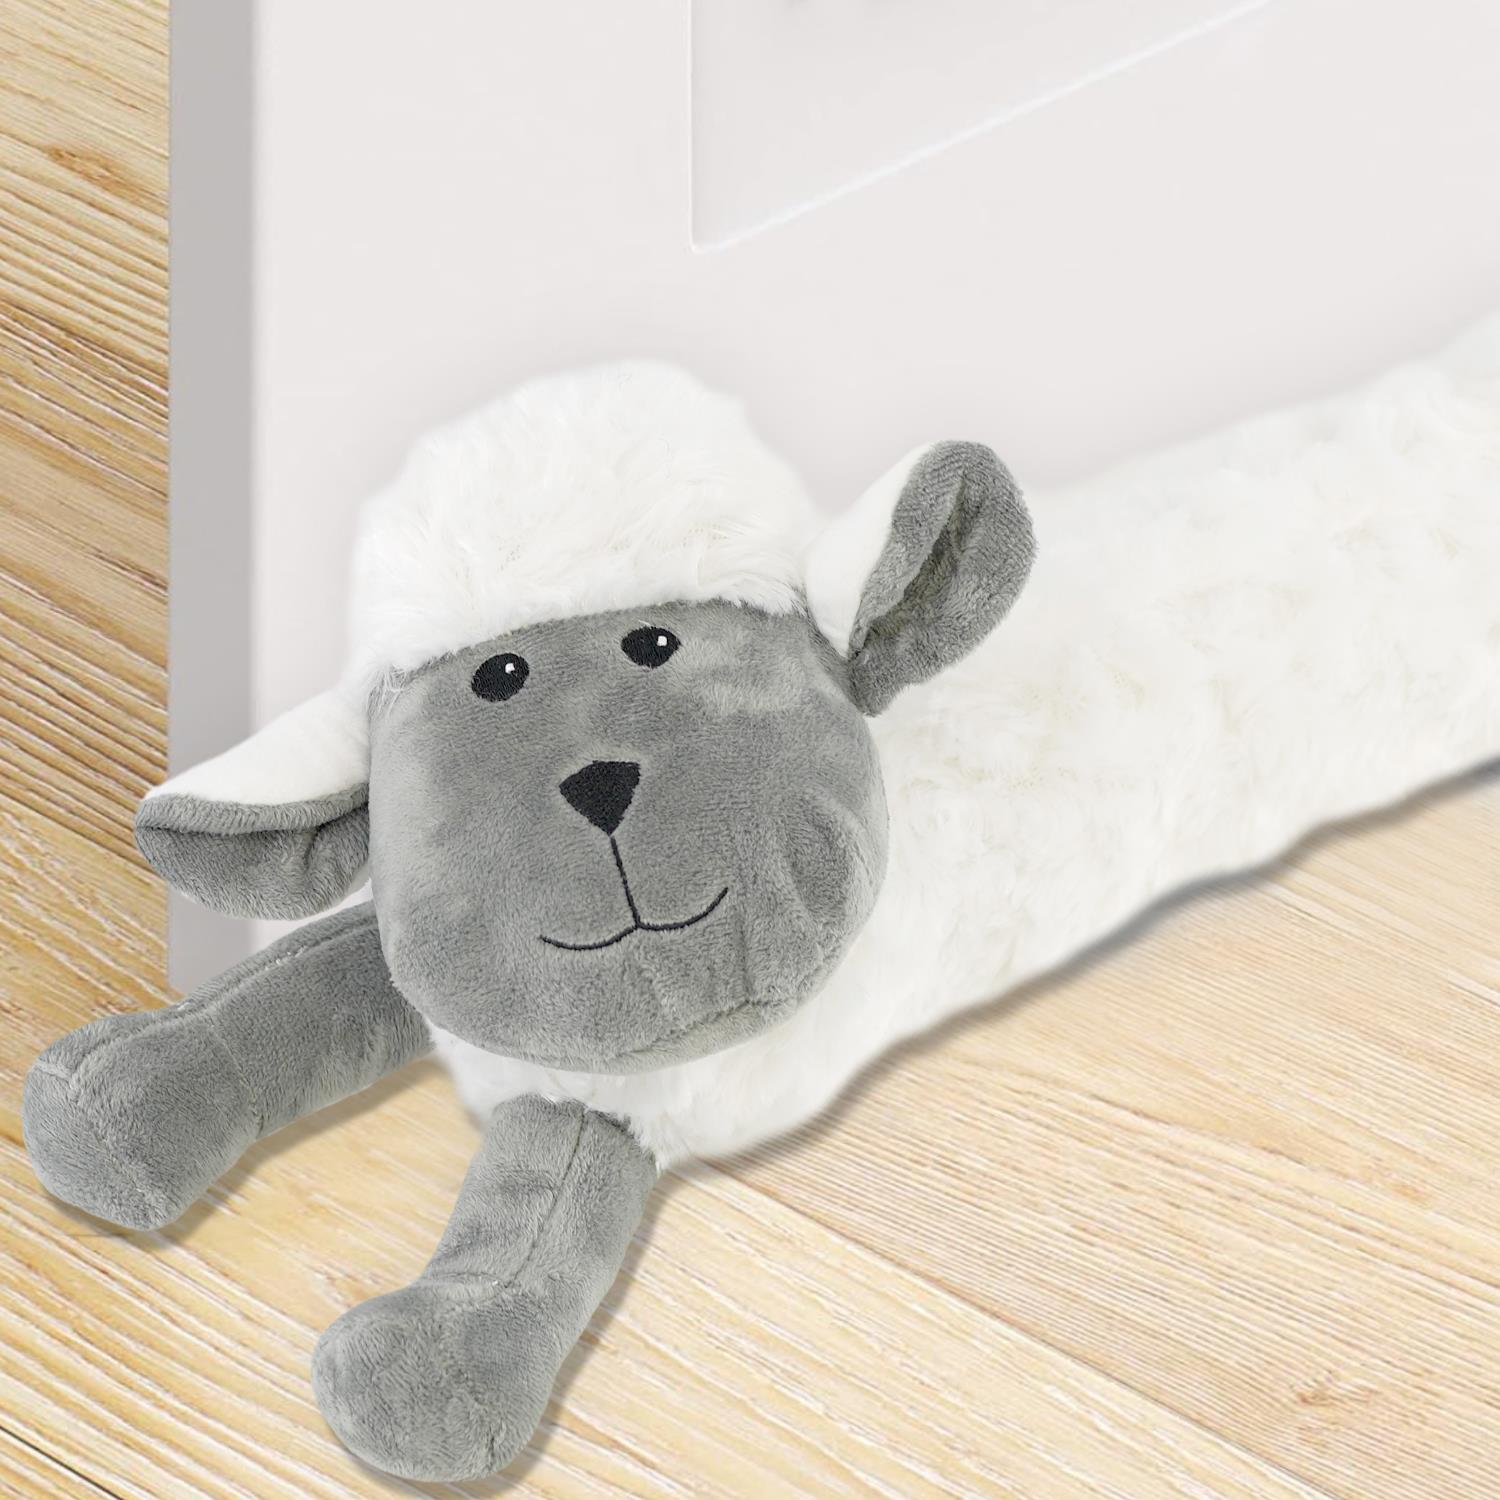 Novelty White Sheep Excluder by The Magic Toy Shop - The Magic Toy Shop